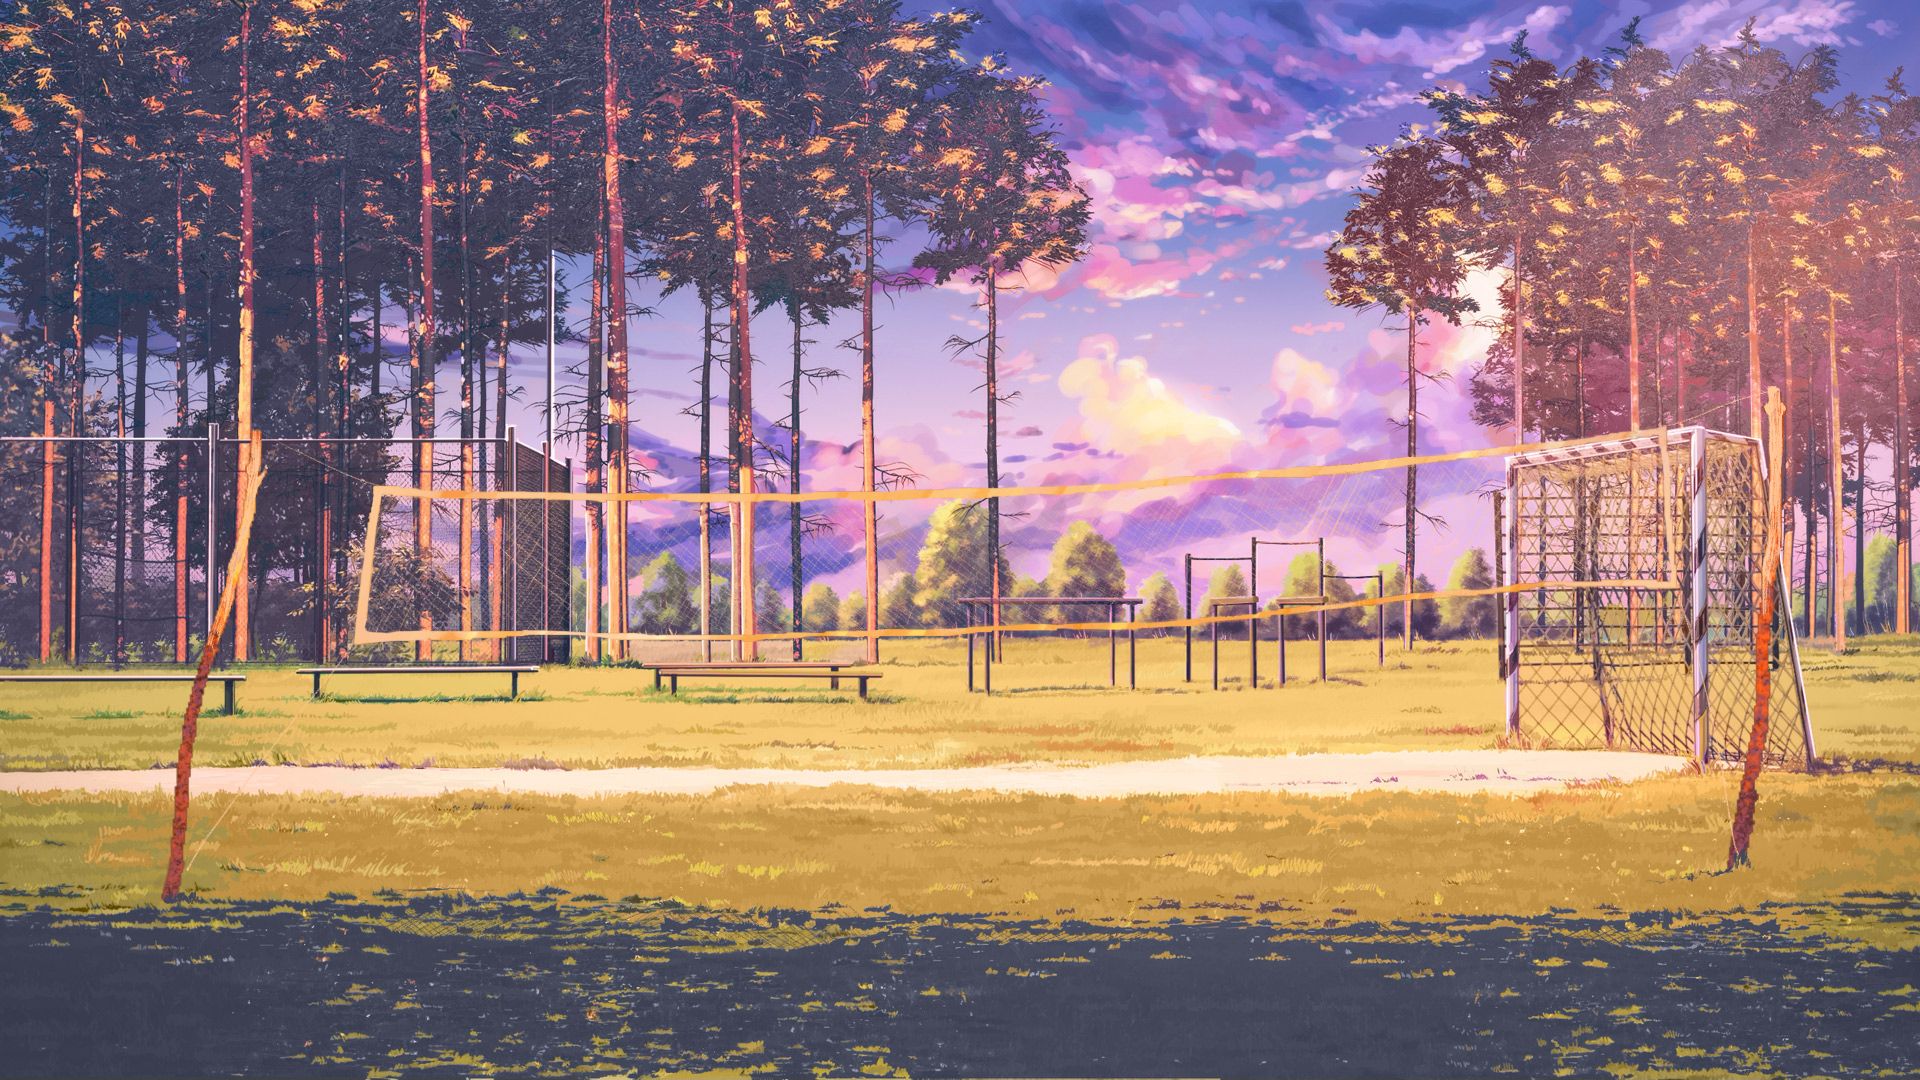 ext_playground_volley_sunset